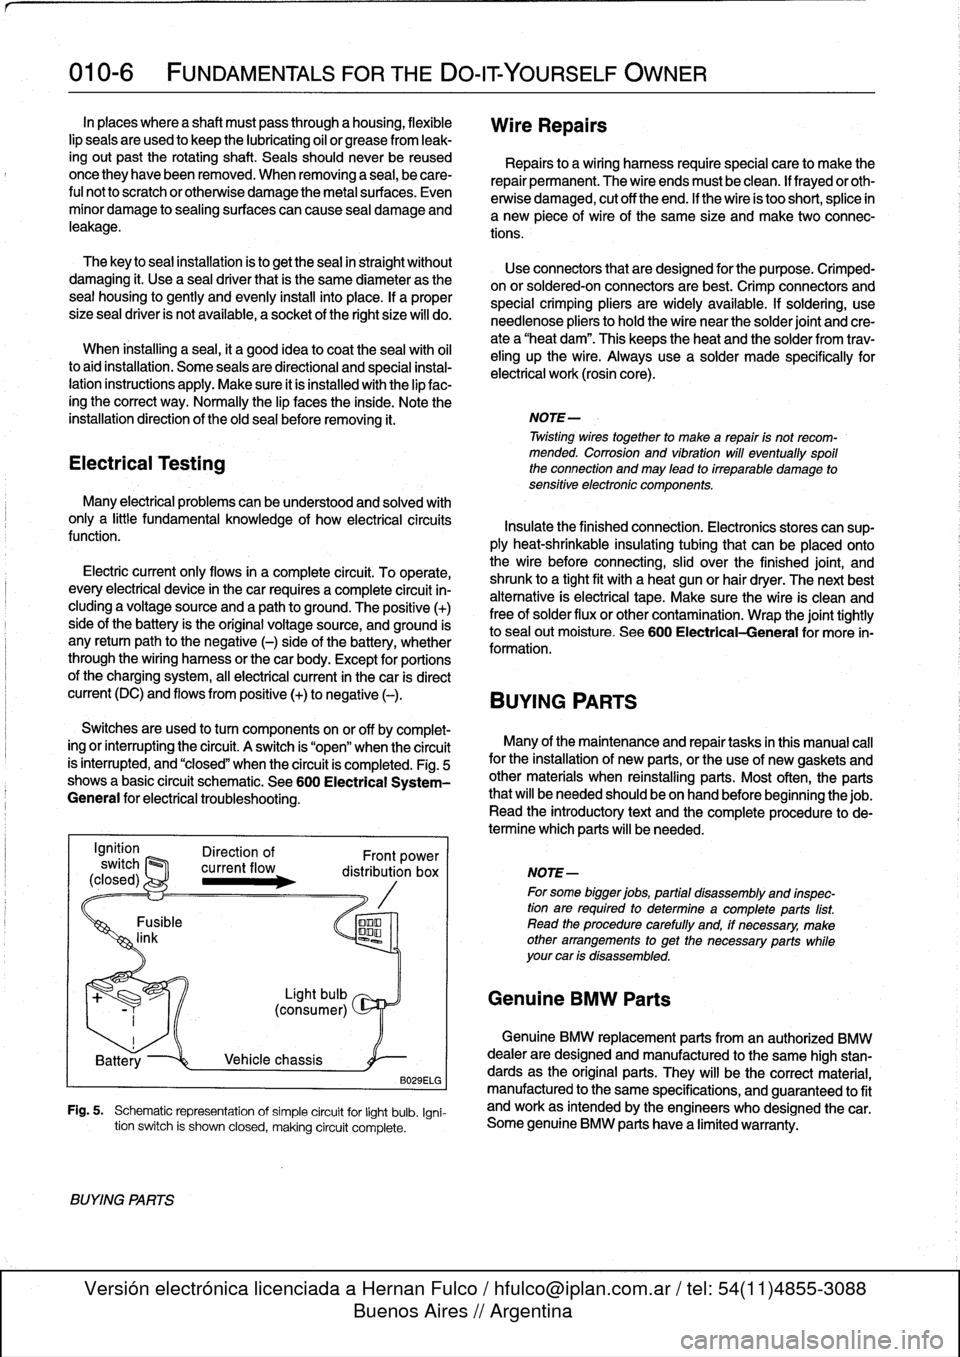 BMW 318i 1997 E36 Workshop Manual 
010-
6

	

FUNDAMENTALS
FOR
THE
DO-ITYOURSELF
OWNER

In
places
where
a
shaft
mustpass
through
a
housing,
flexible
lip
seals
areused
to
keep
the
lubricating
oil
or
grease
from
leak-

ingout
past
the
r